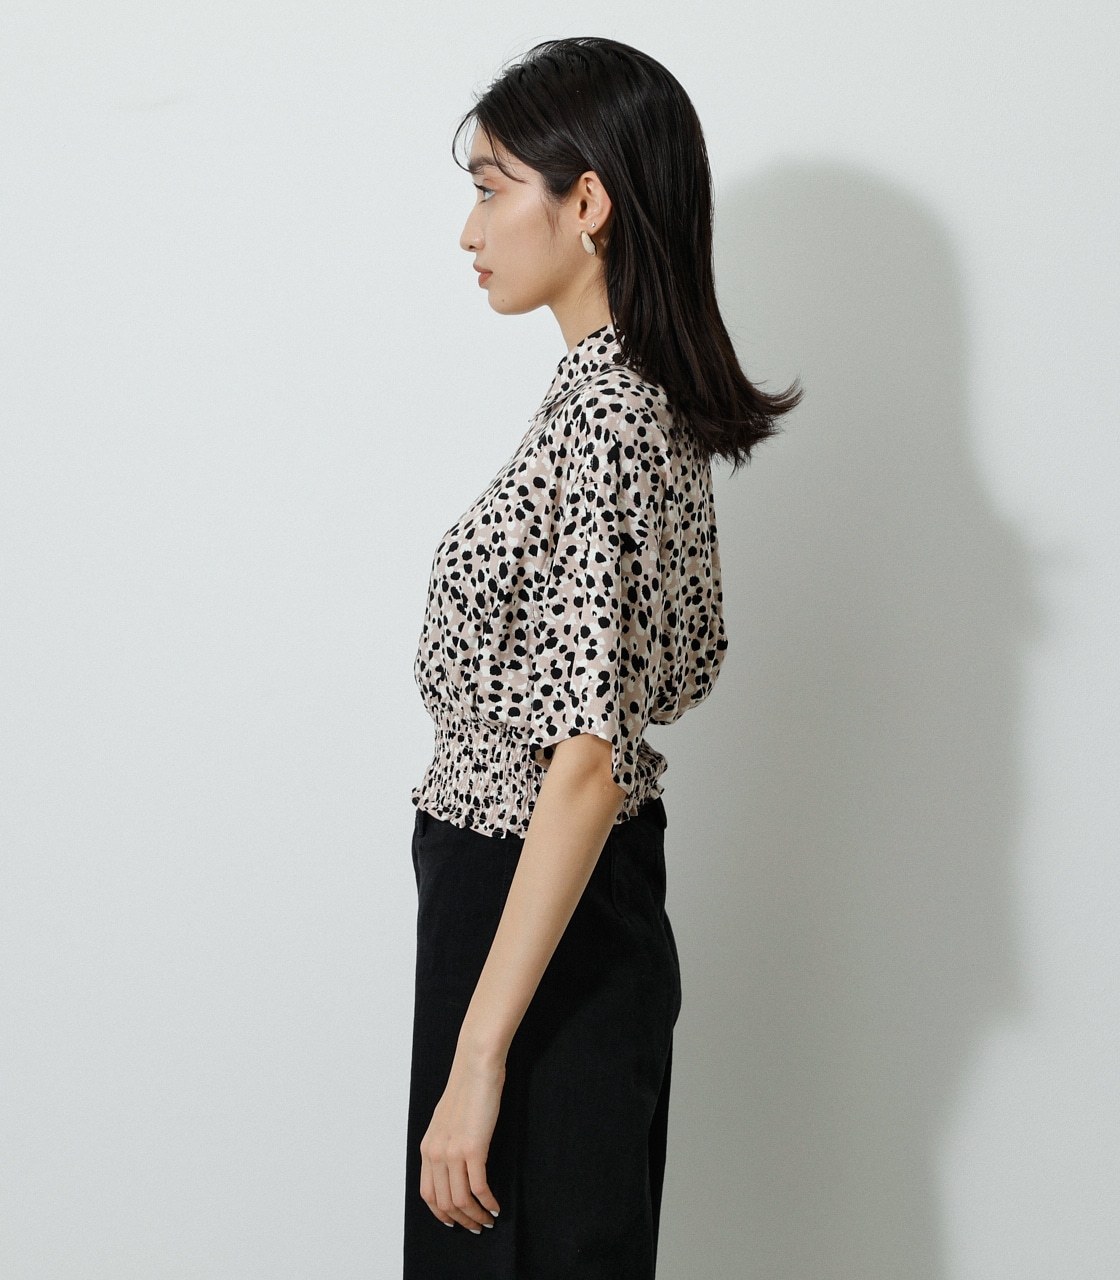 ECOVERO LEOPARD PRINT BLOUSE/エコヴェロレオパードプリントブラウス 詳細画像 柄BEG 6